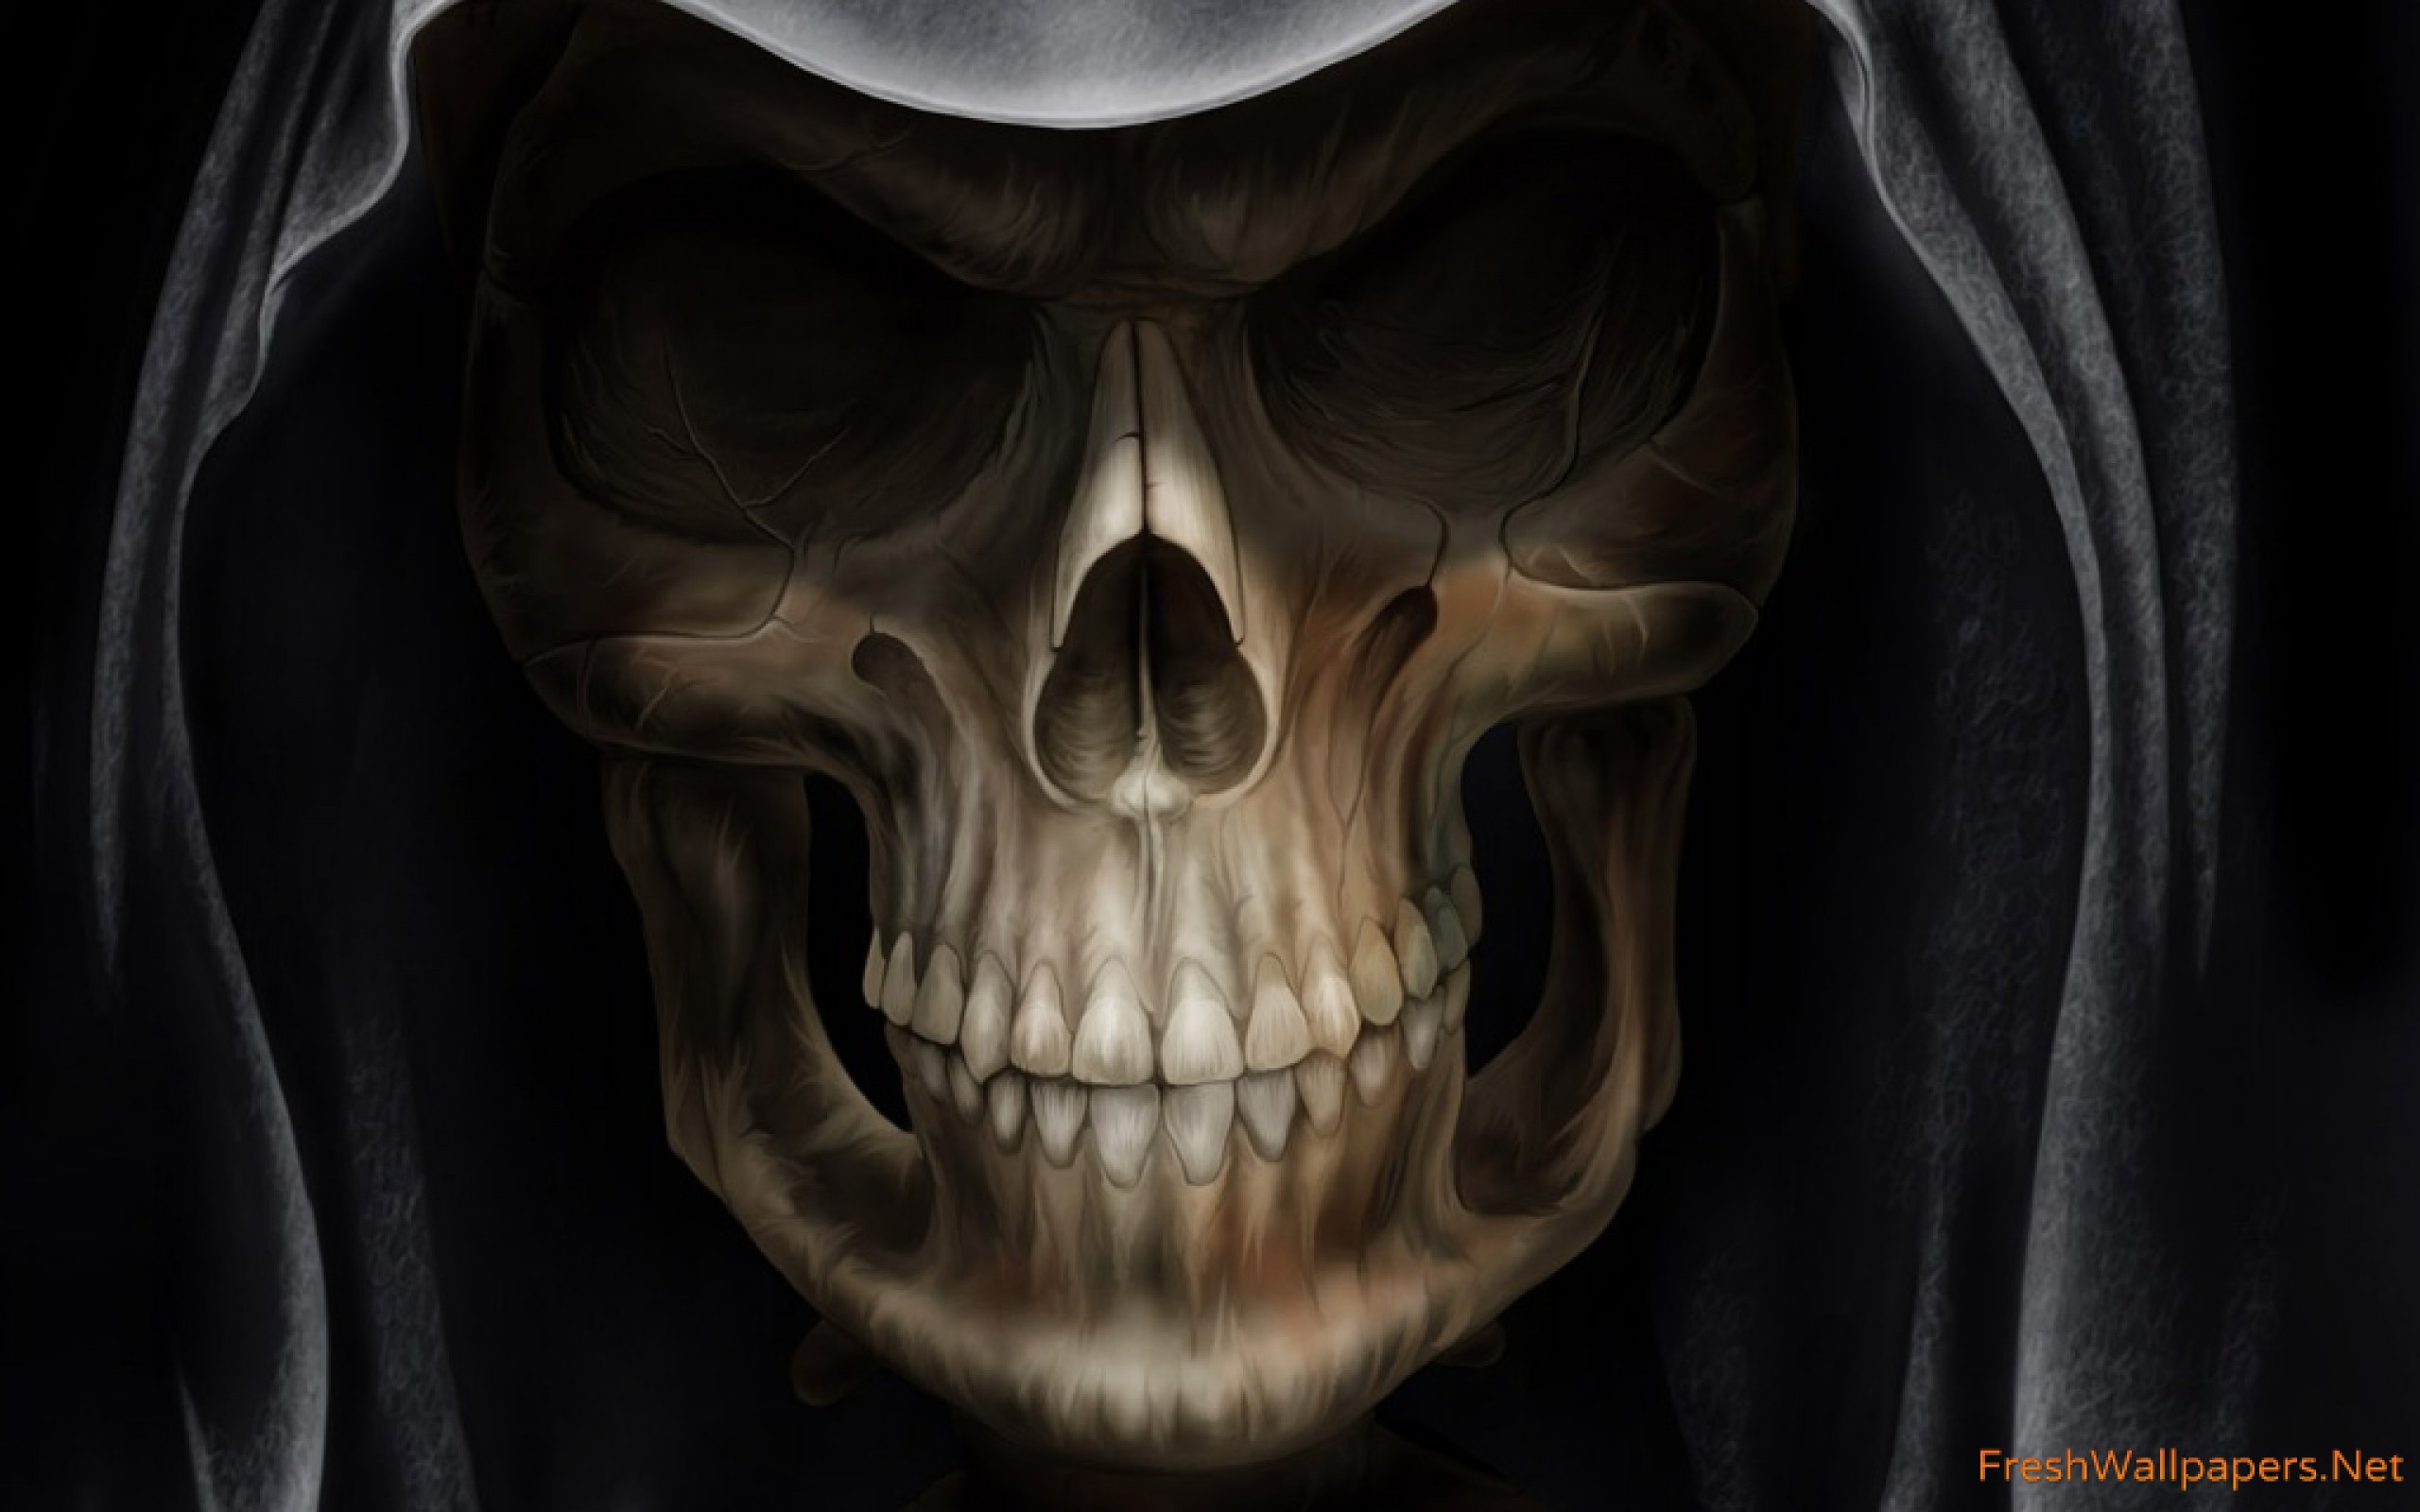 Scary Skull wallpapers | Freshwallpapers